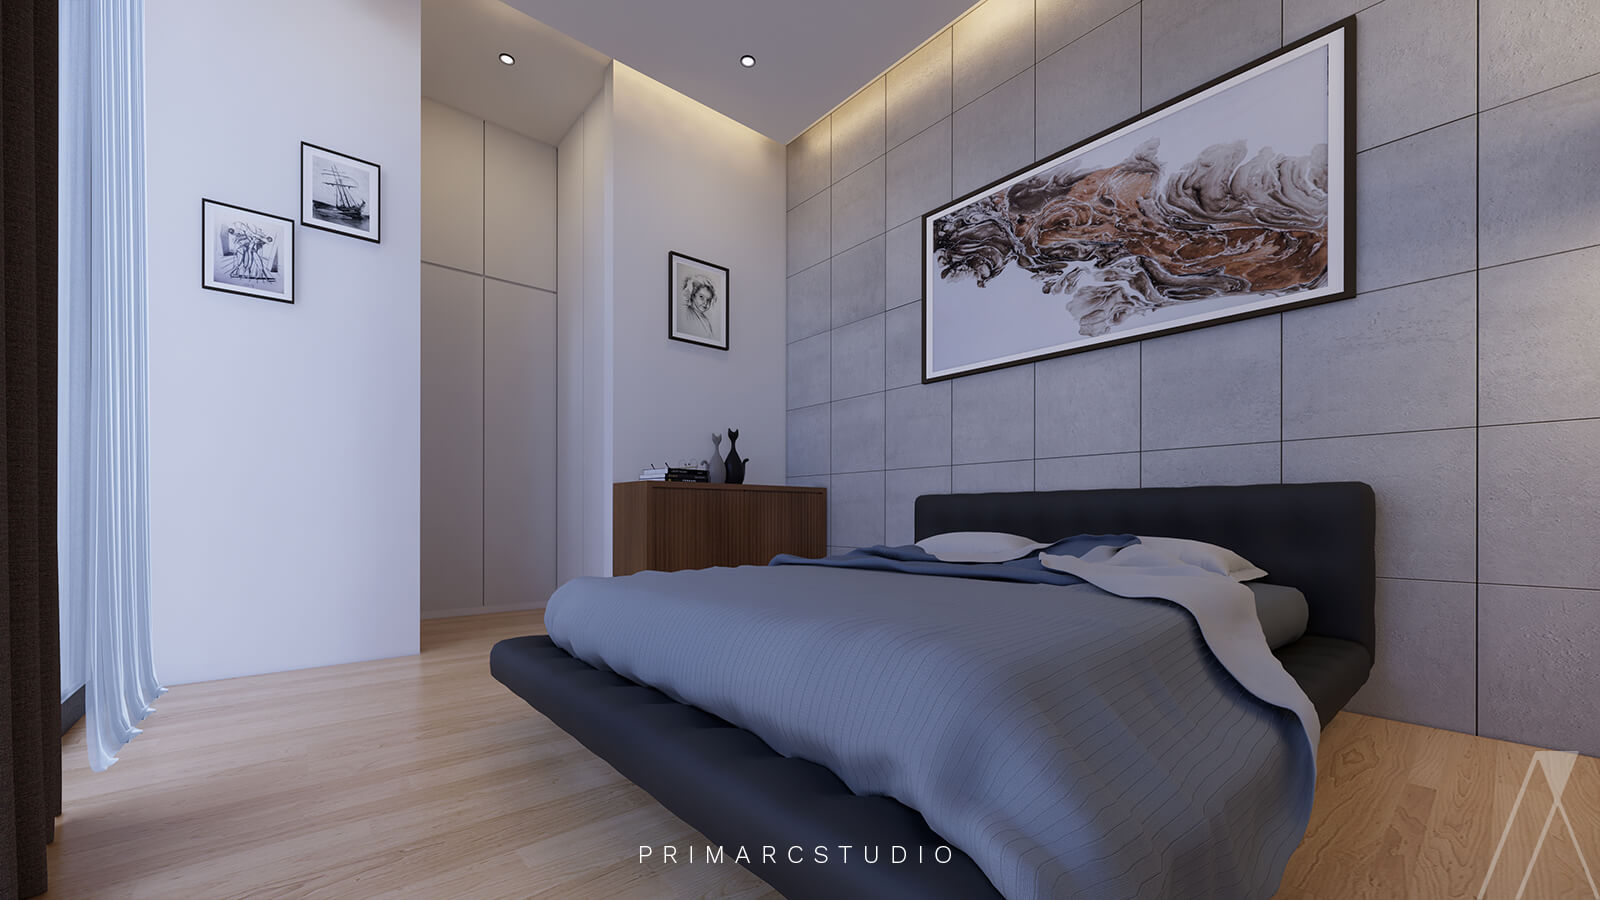 Bedroom interior design with square tiles and attached washroom